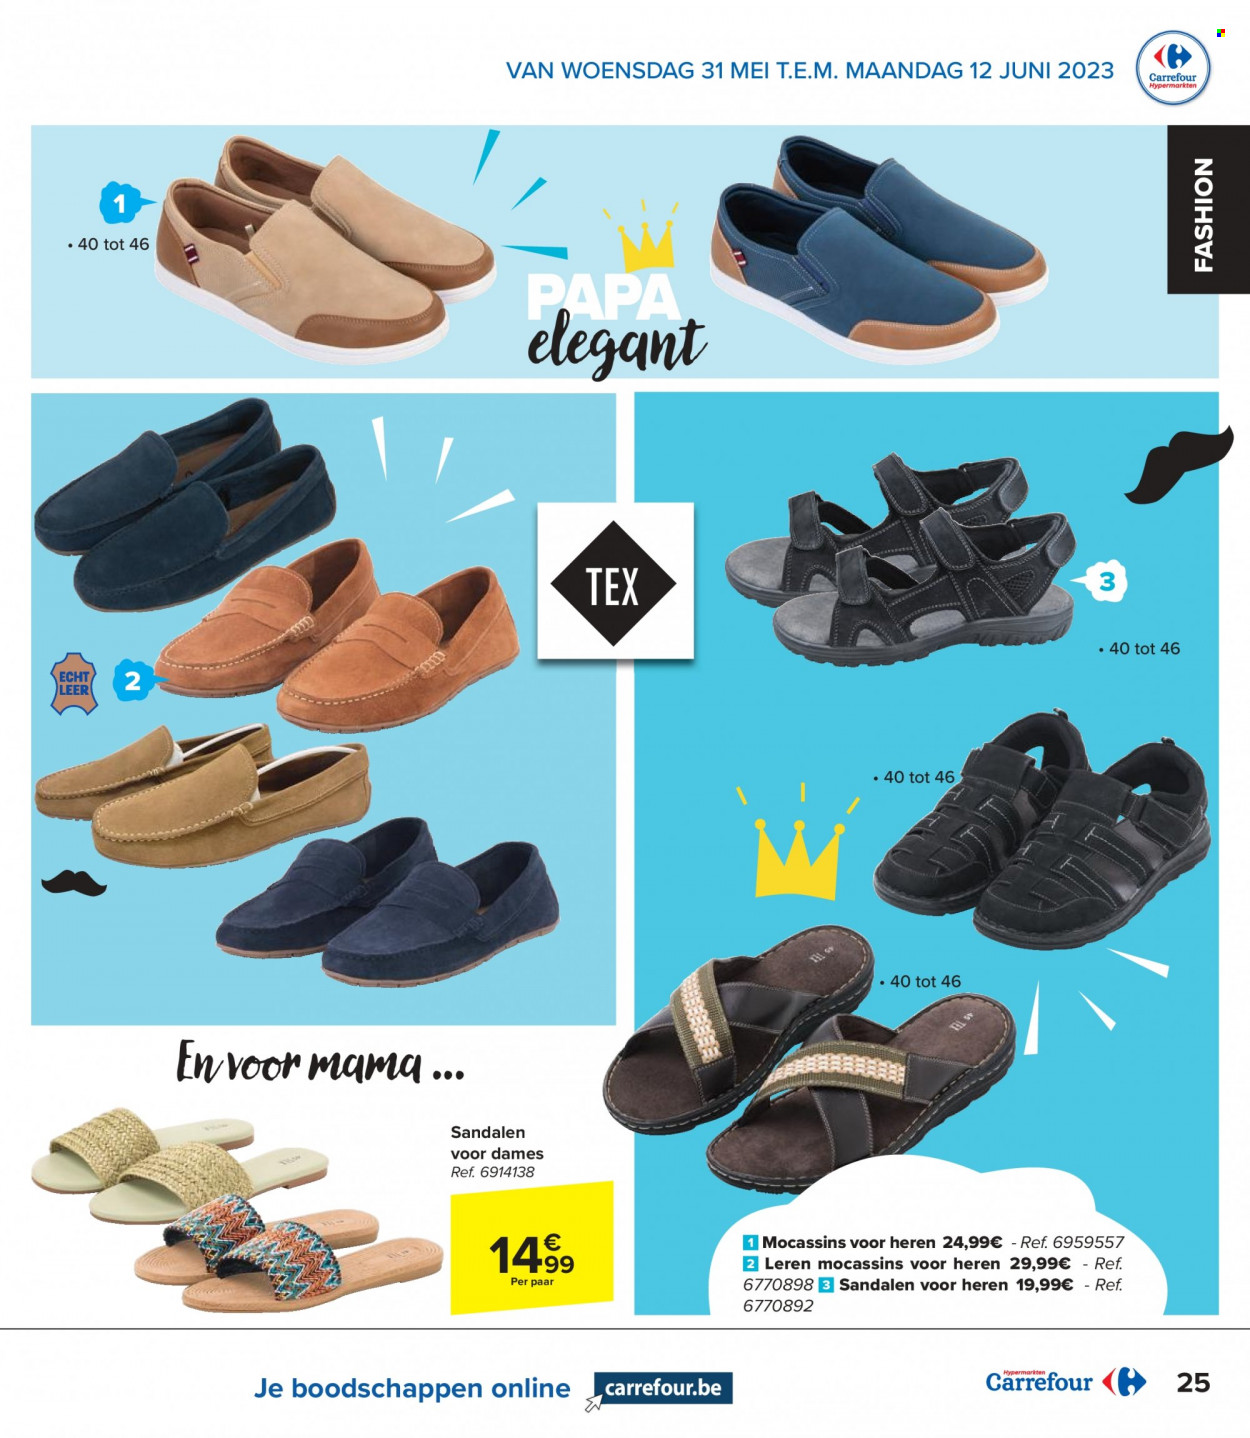 Catalogue Carrefour hypermarkt - 31.5.2023 - 12.6.2023. Page 25.